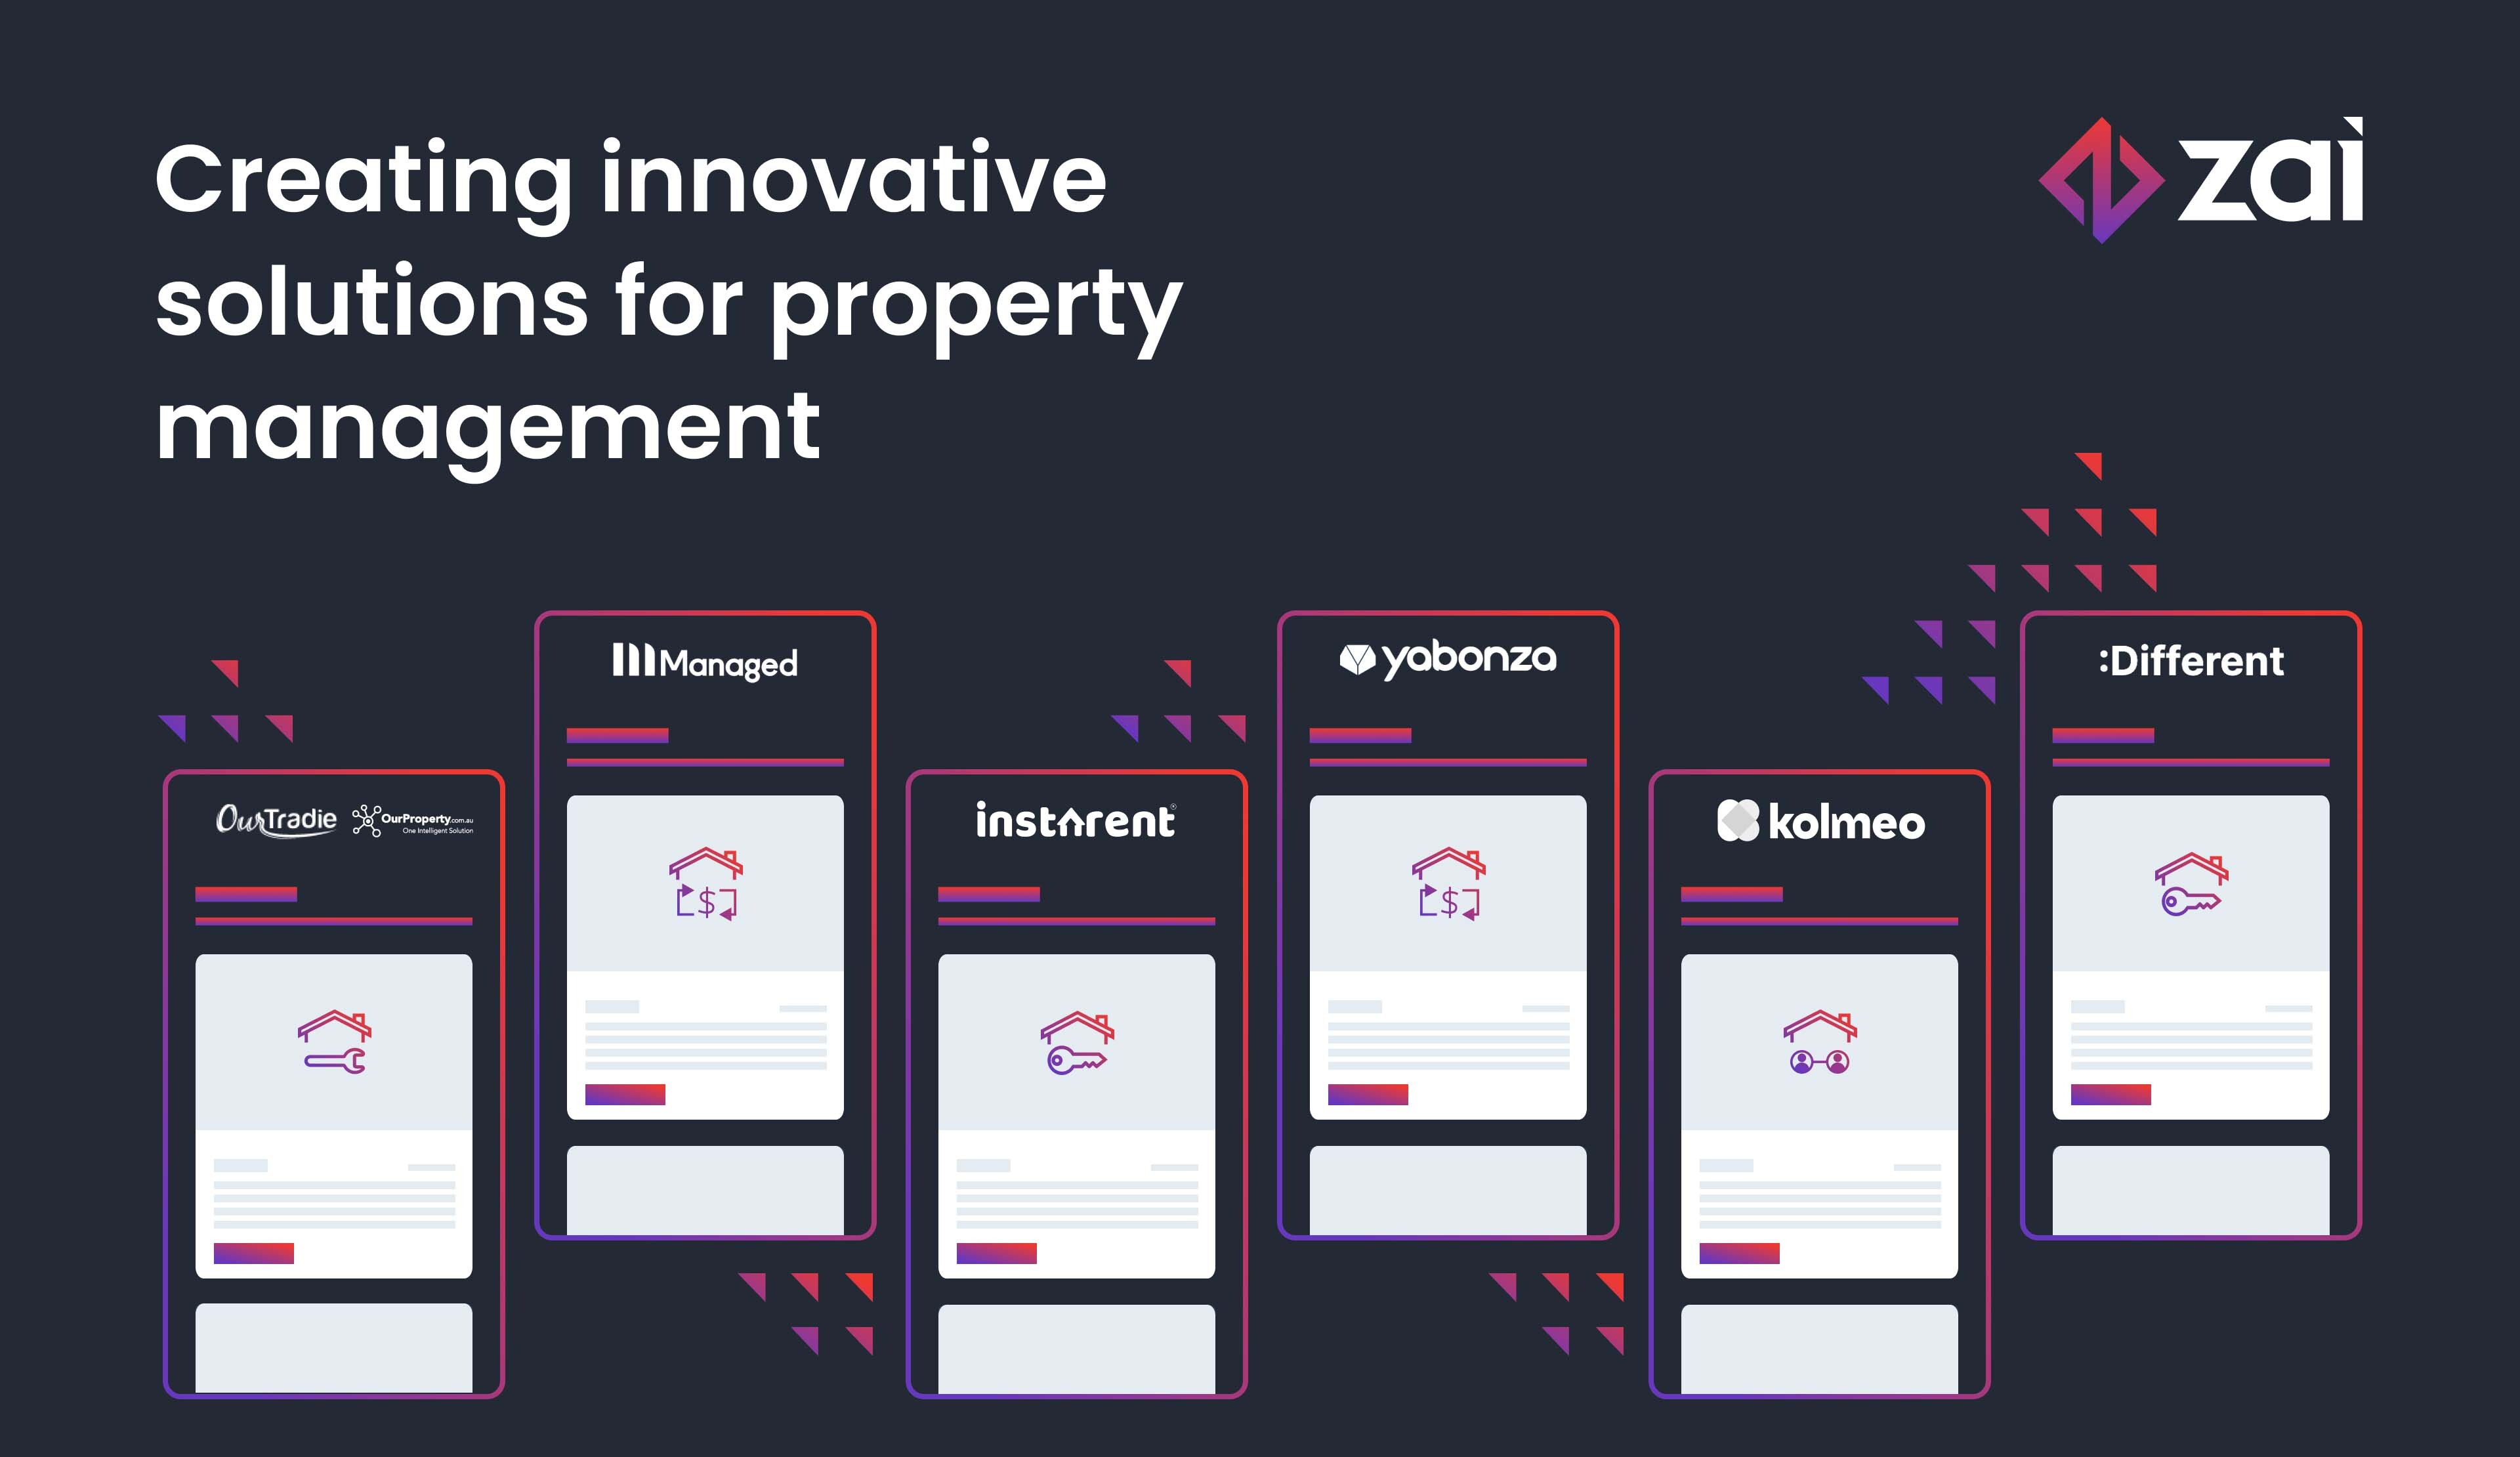 Creating innovative solutions for property management